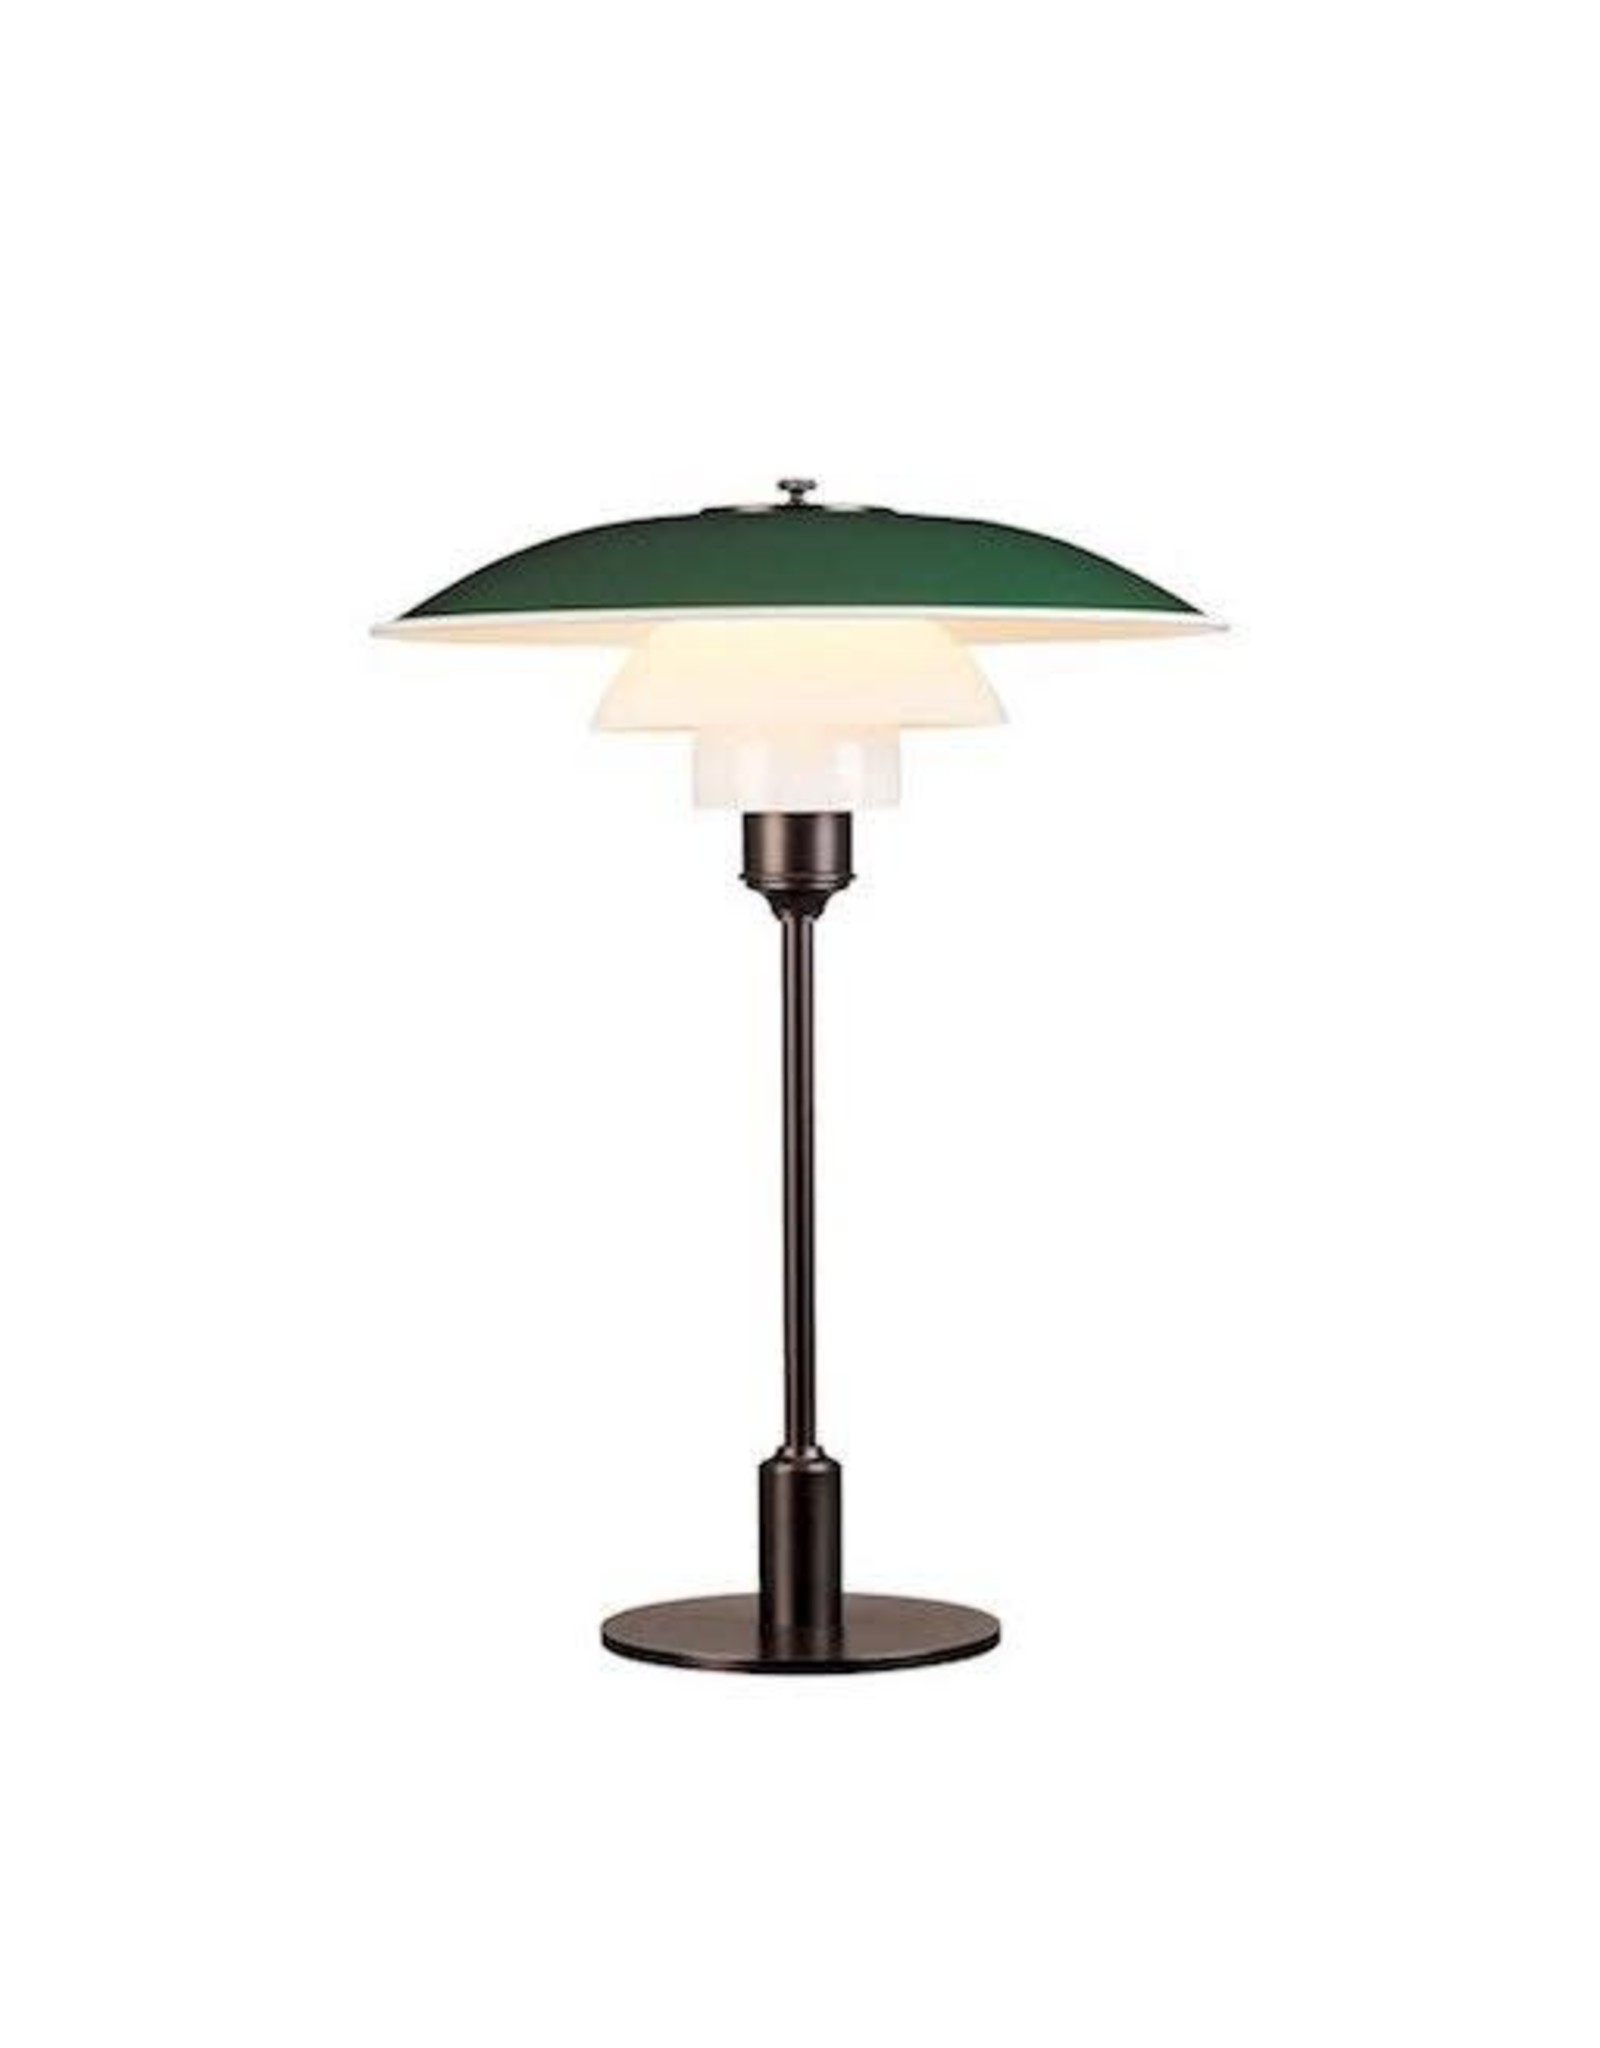 PH 3 1/2-2 1/2 TABLE LAMP IN COLOR FINISH